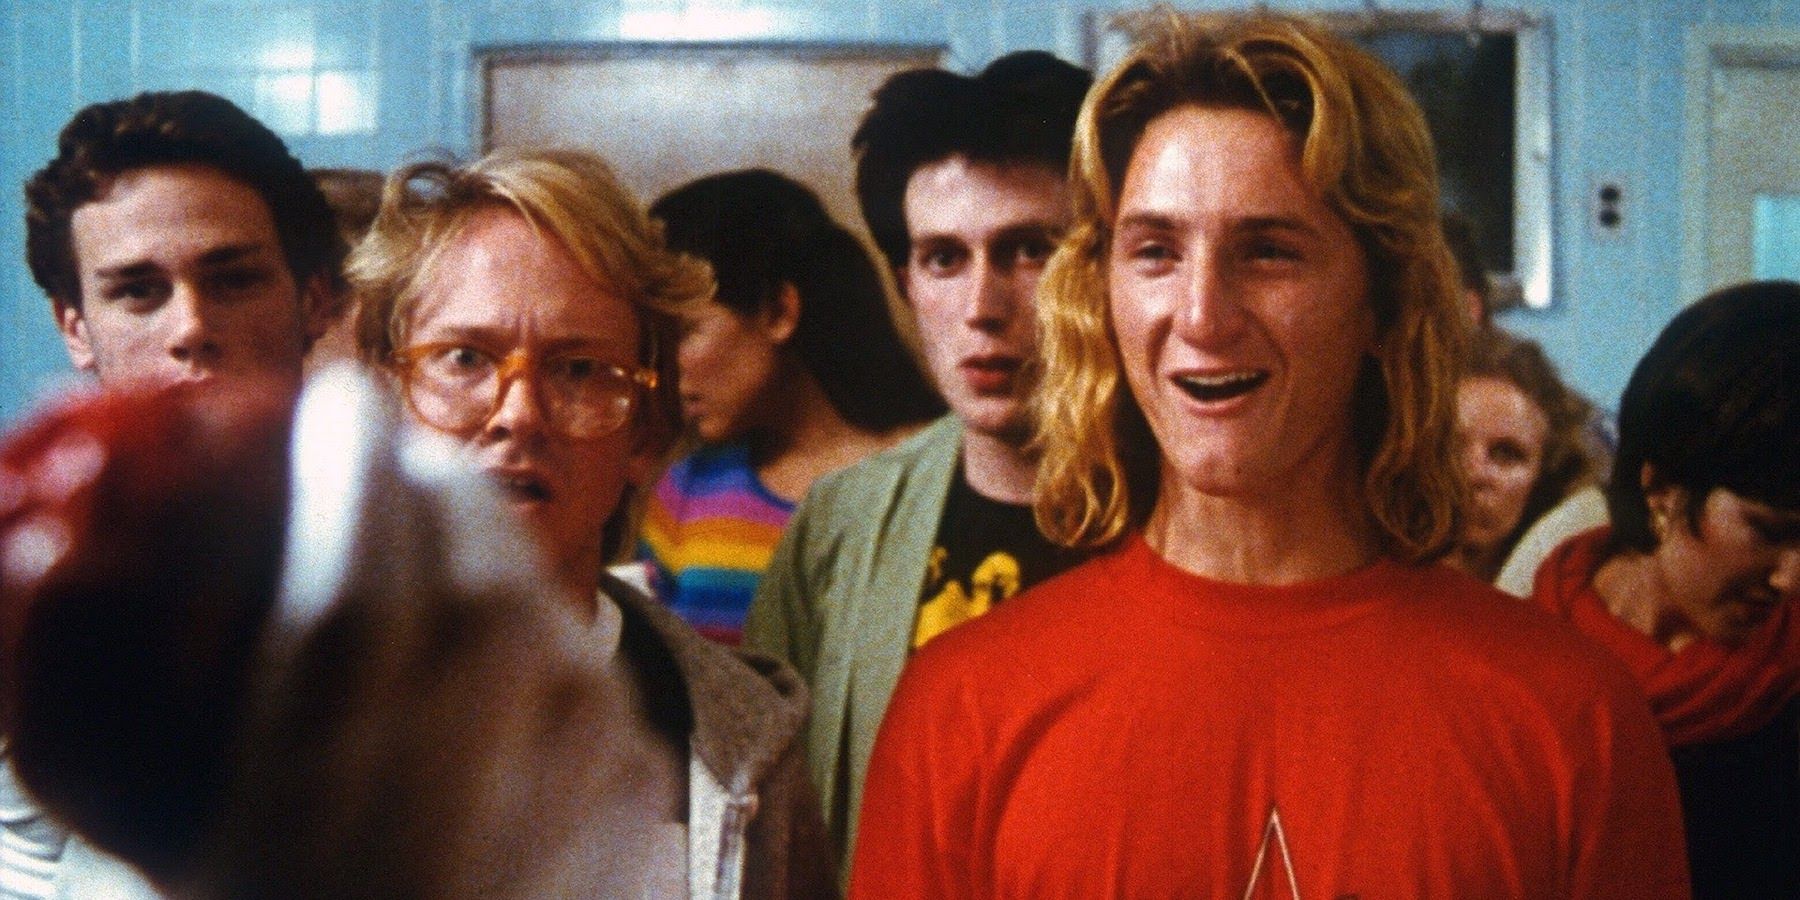 Sean Penn and Nicolas Cage in Fast Times at Ridgemont High